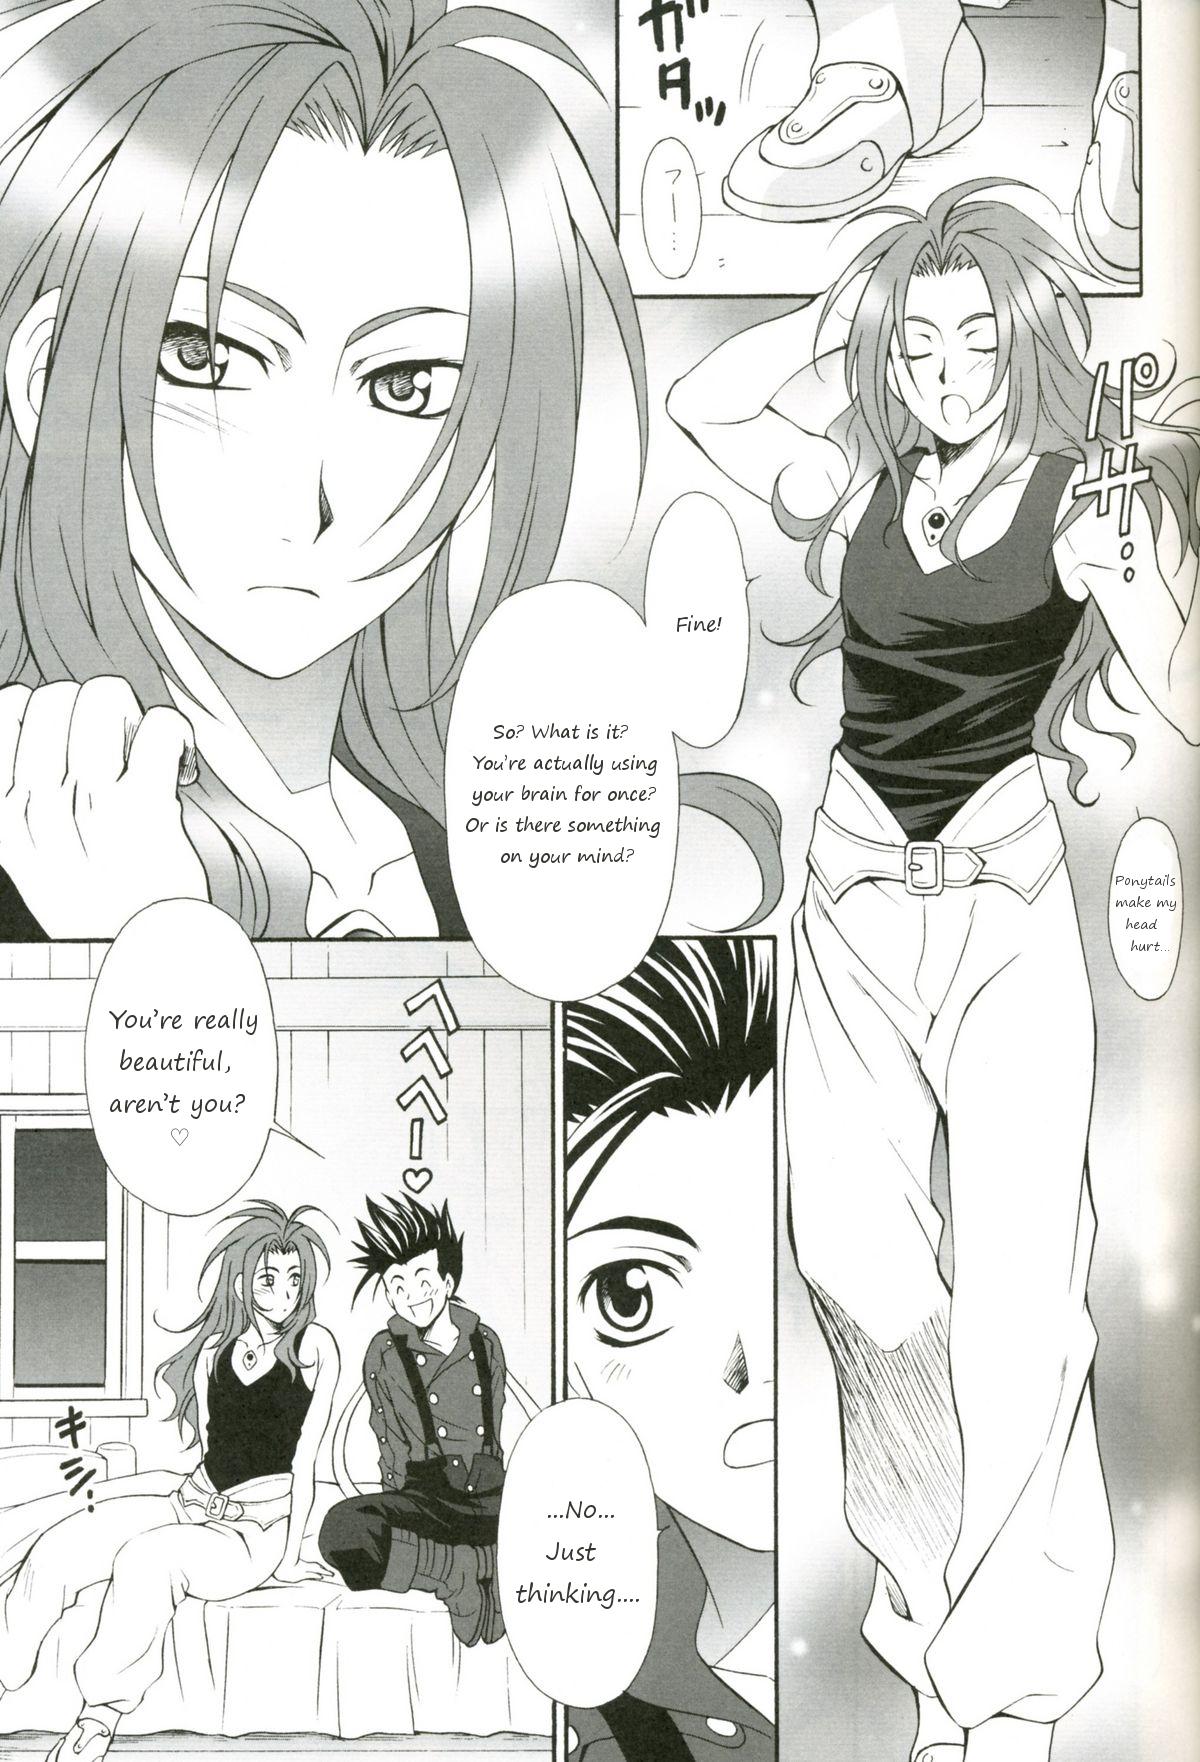 Dirty Eternal Embrace - Tales of symphonia Close - Page 7